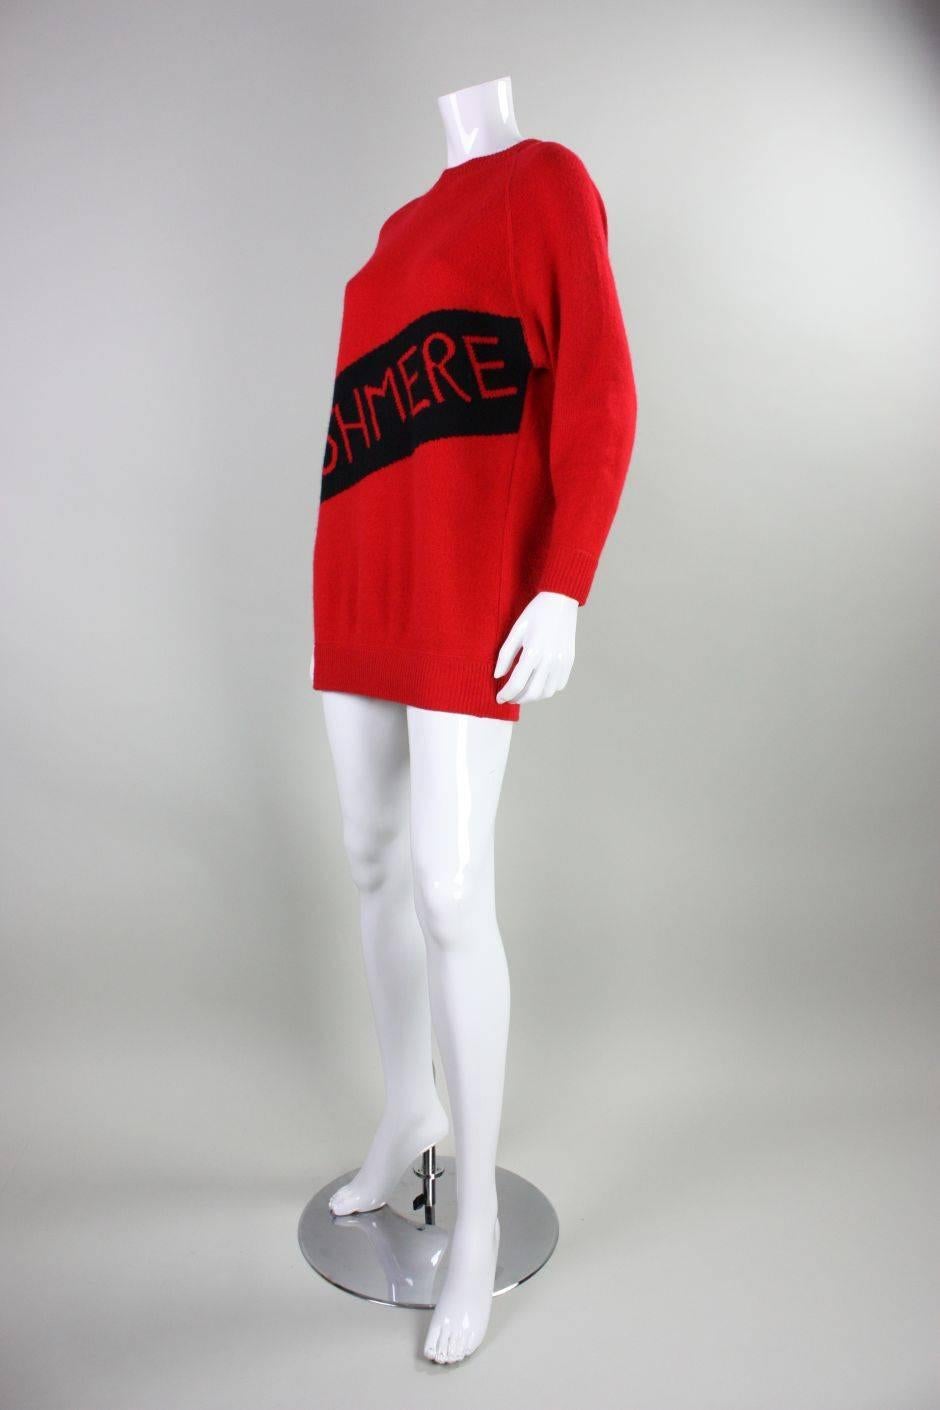 Vintage William Kasper Humorous Cashmere Sweater In Excellent Condition For Sale In Los Angeles, CA